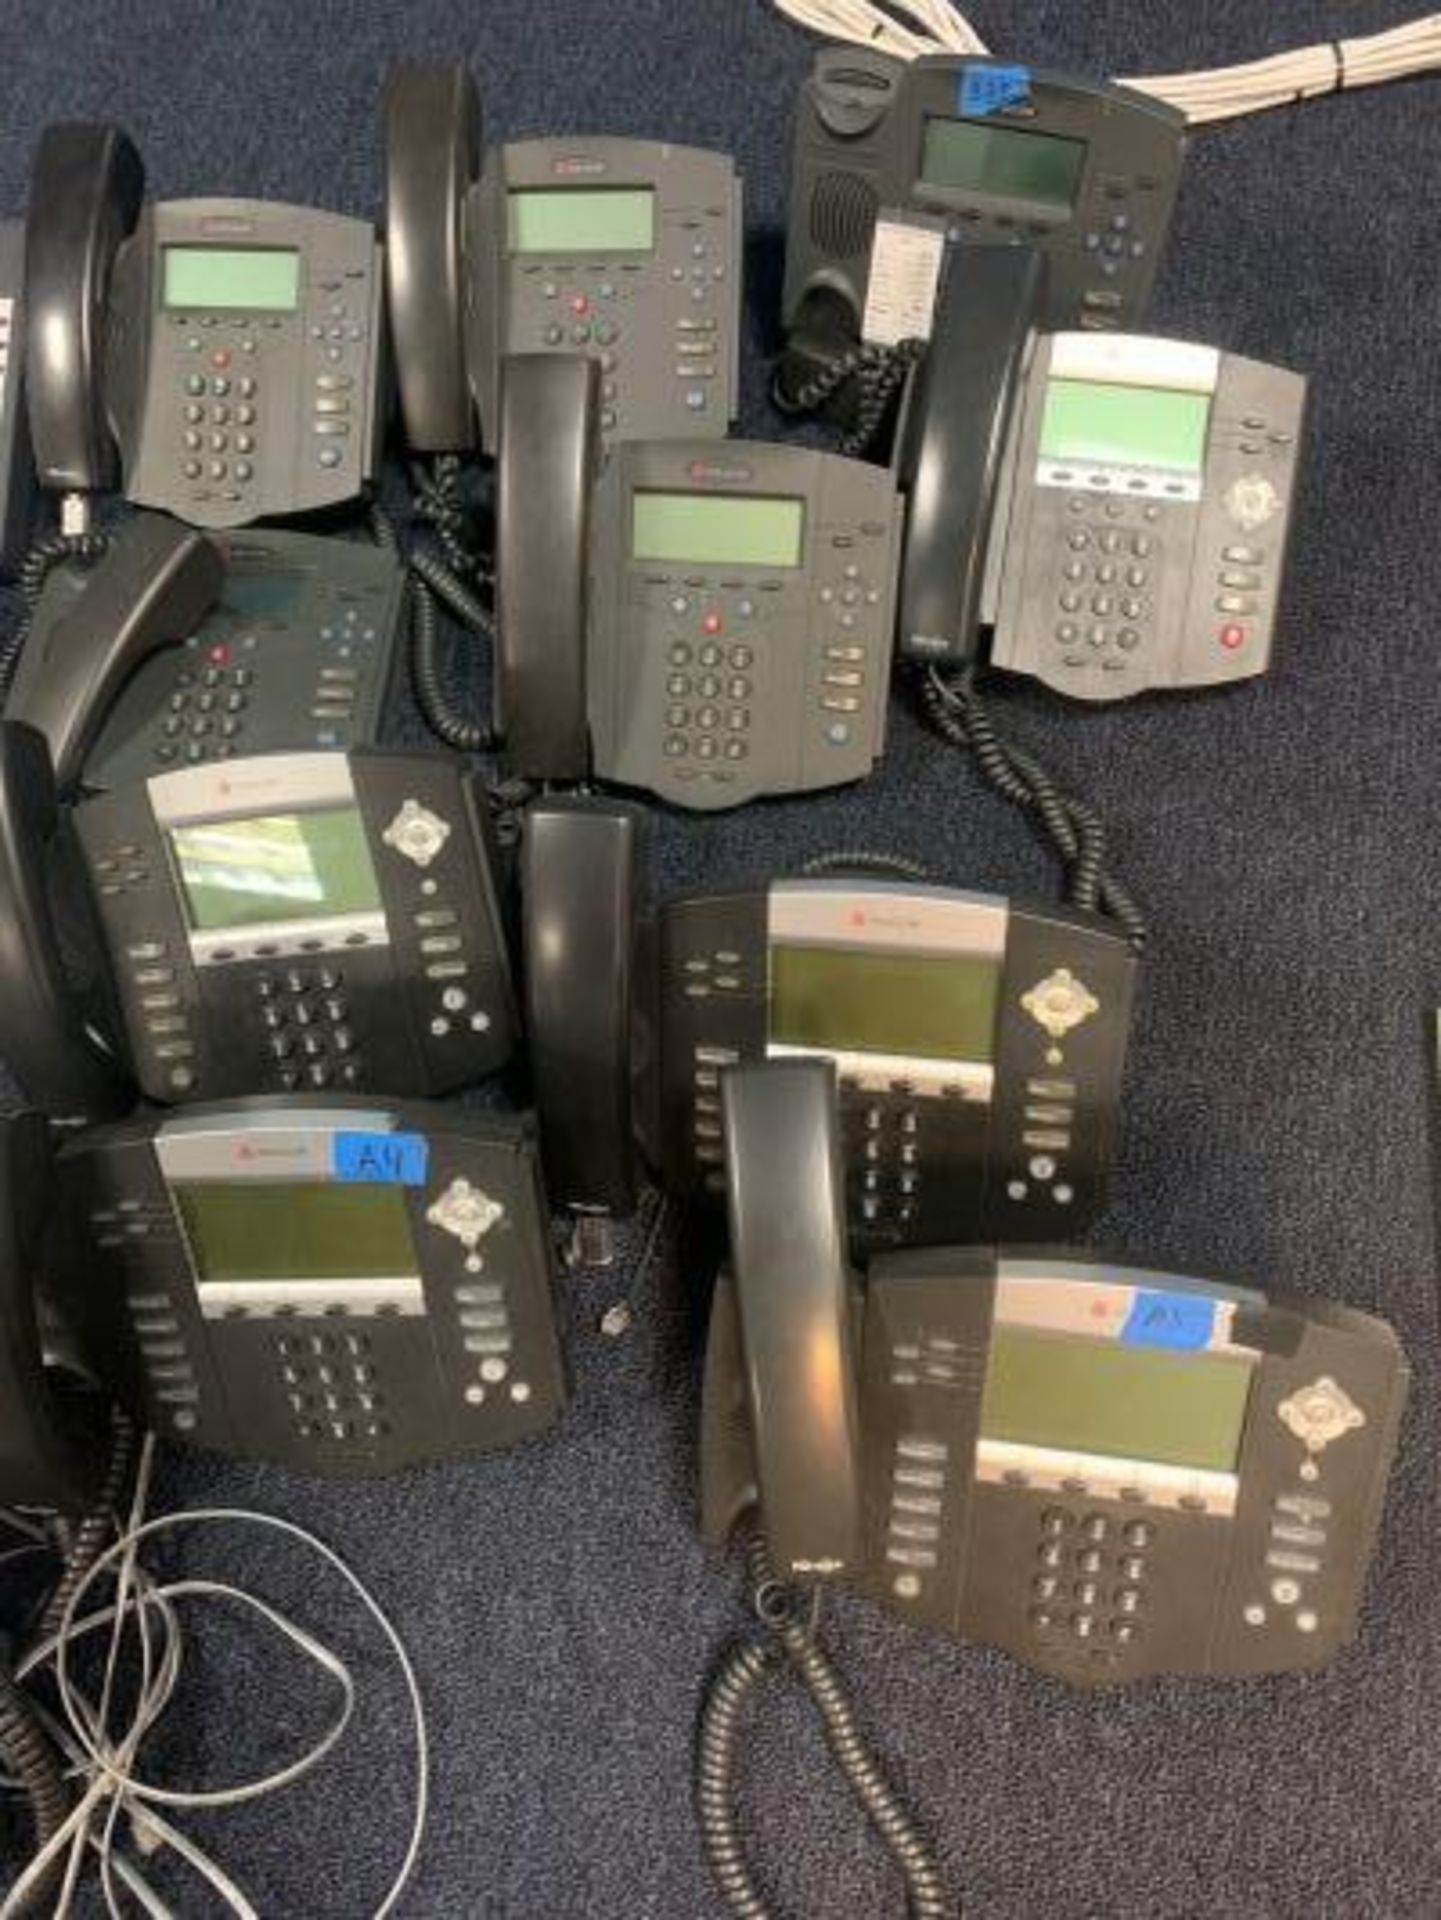 Toshiba Strata Phone System w/ Phones (SOLD AS-IS - NO WARRANTY) - Image 3 of 3